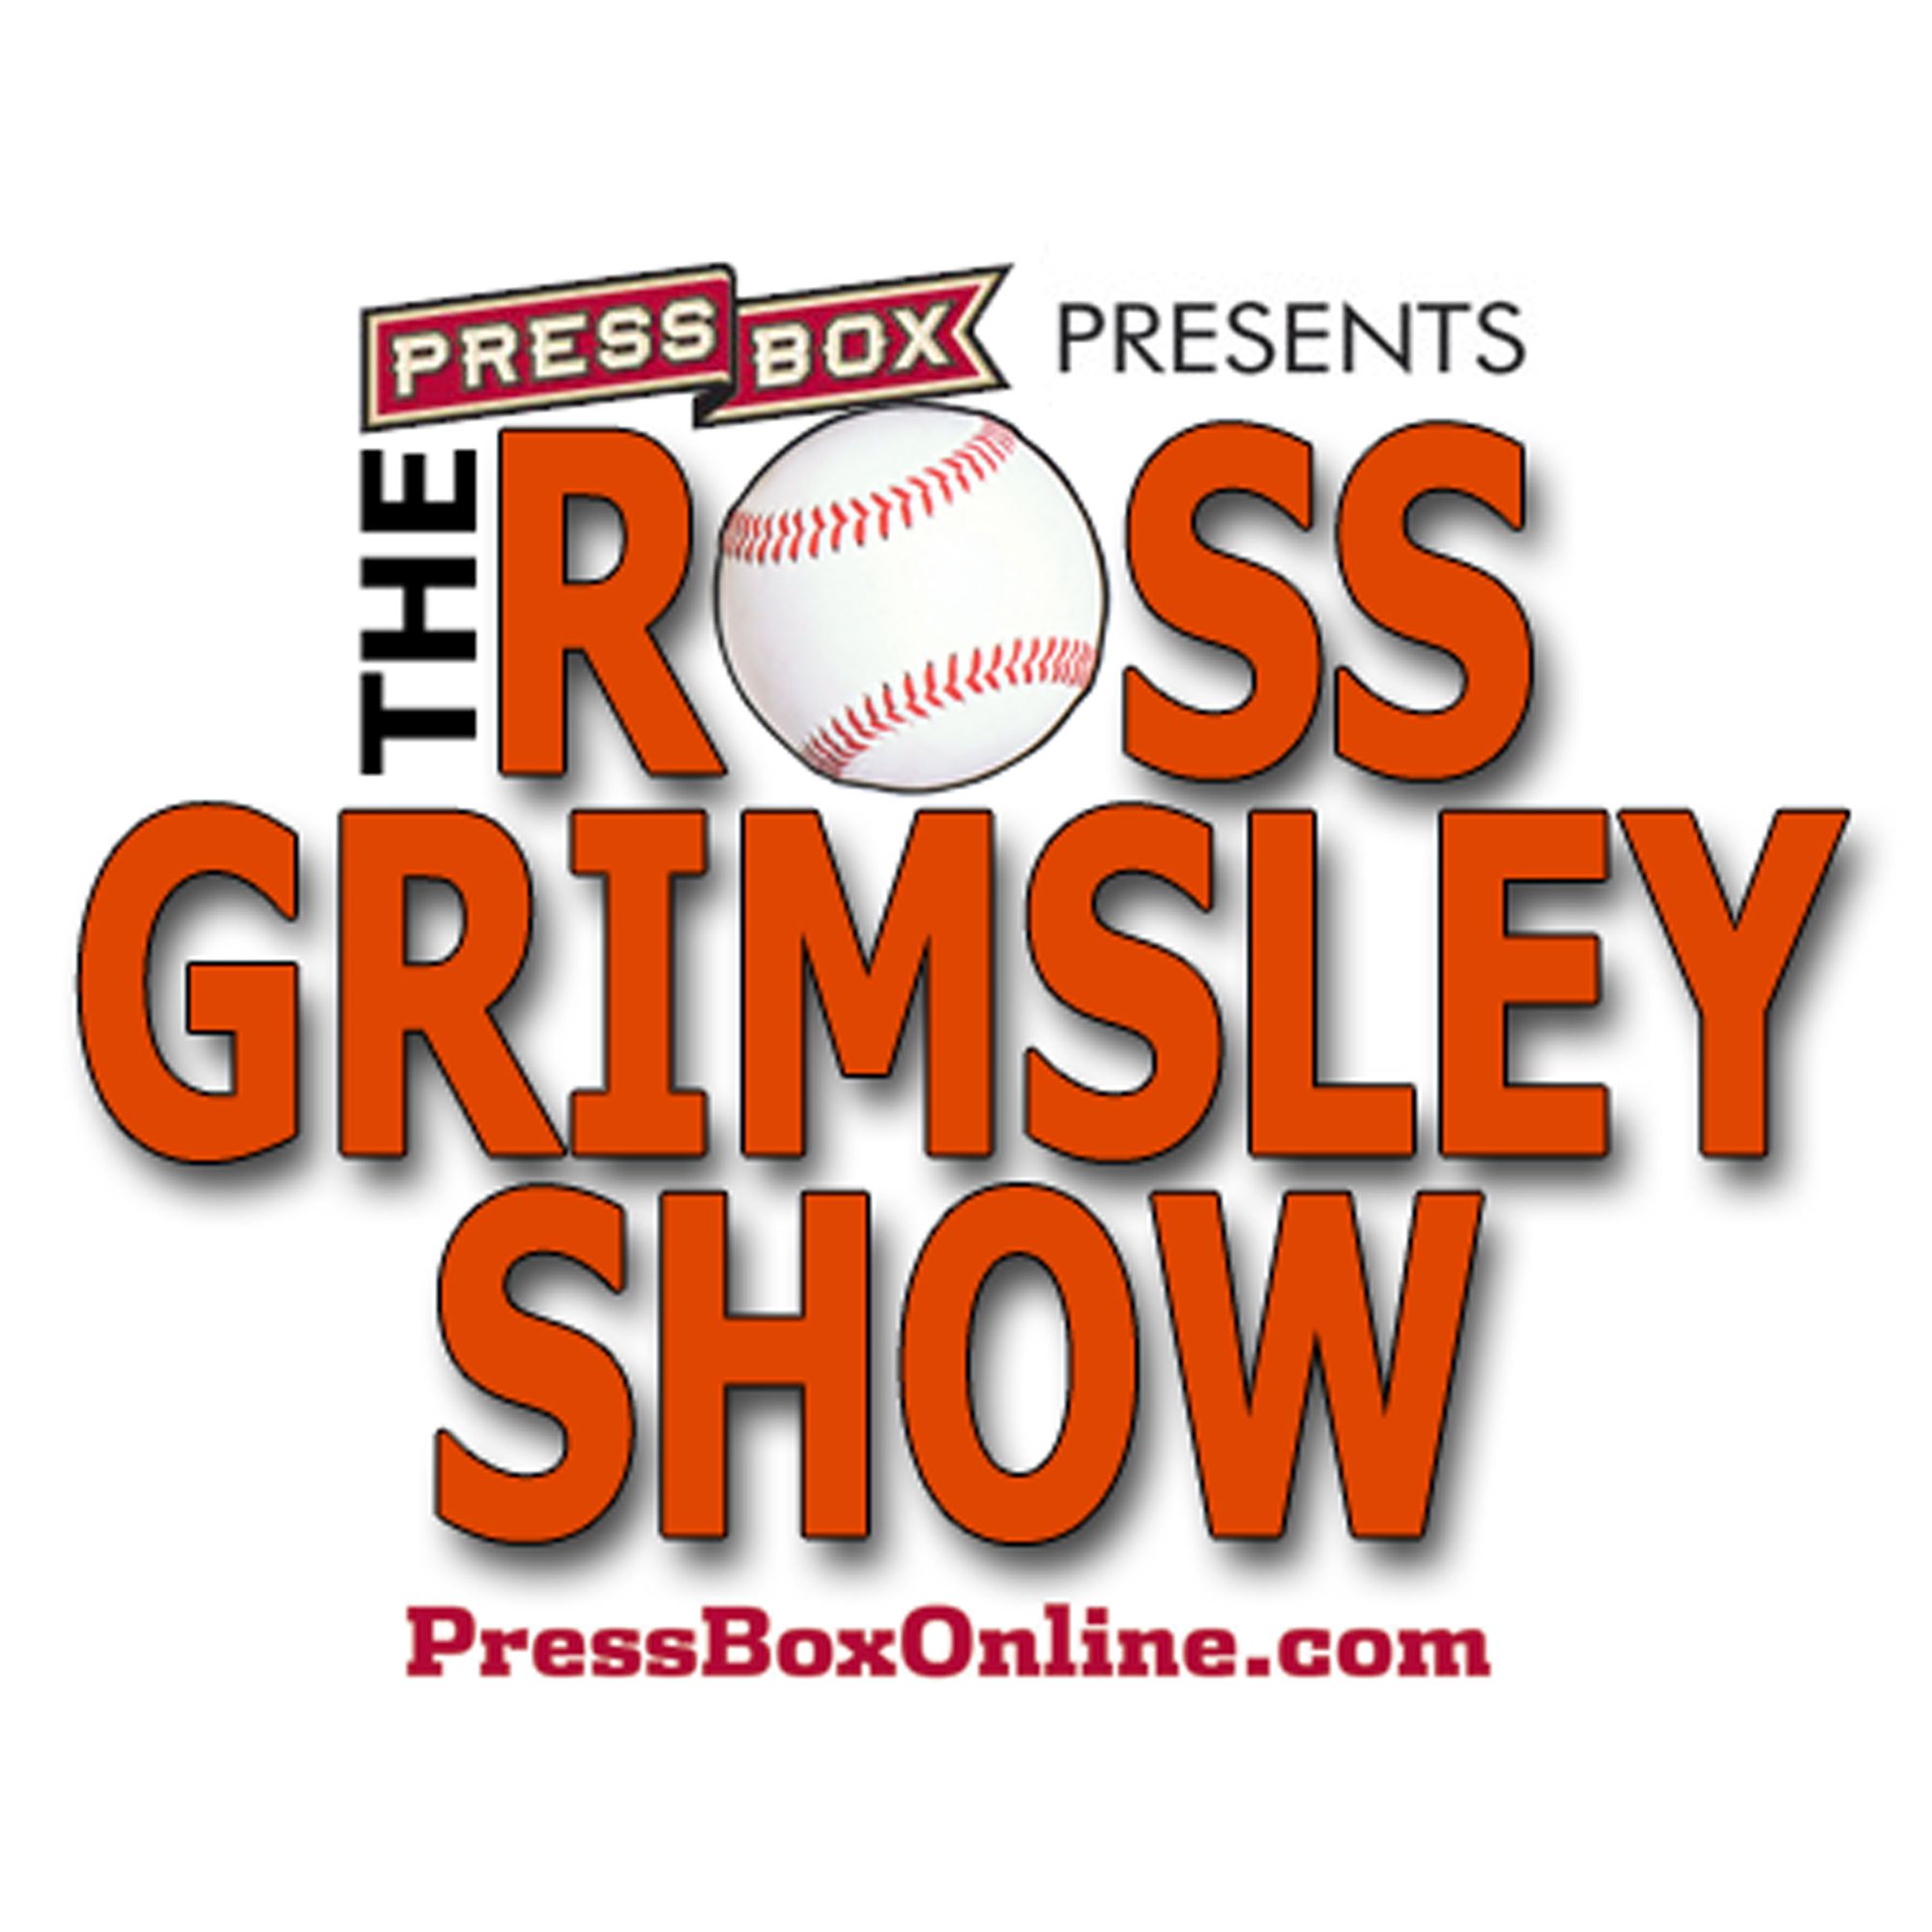 The Ross Grimsley Show